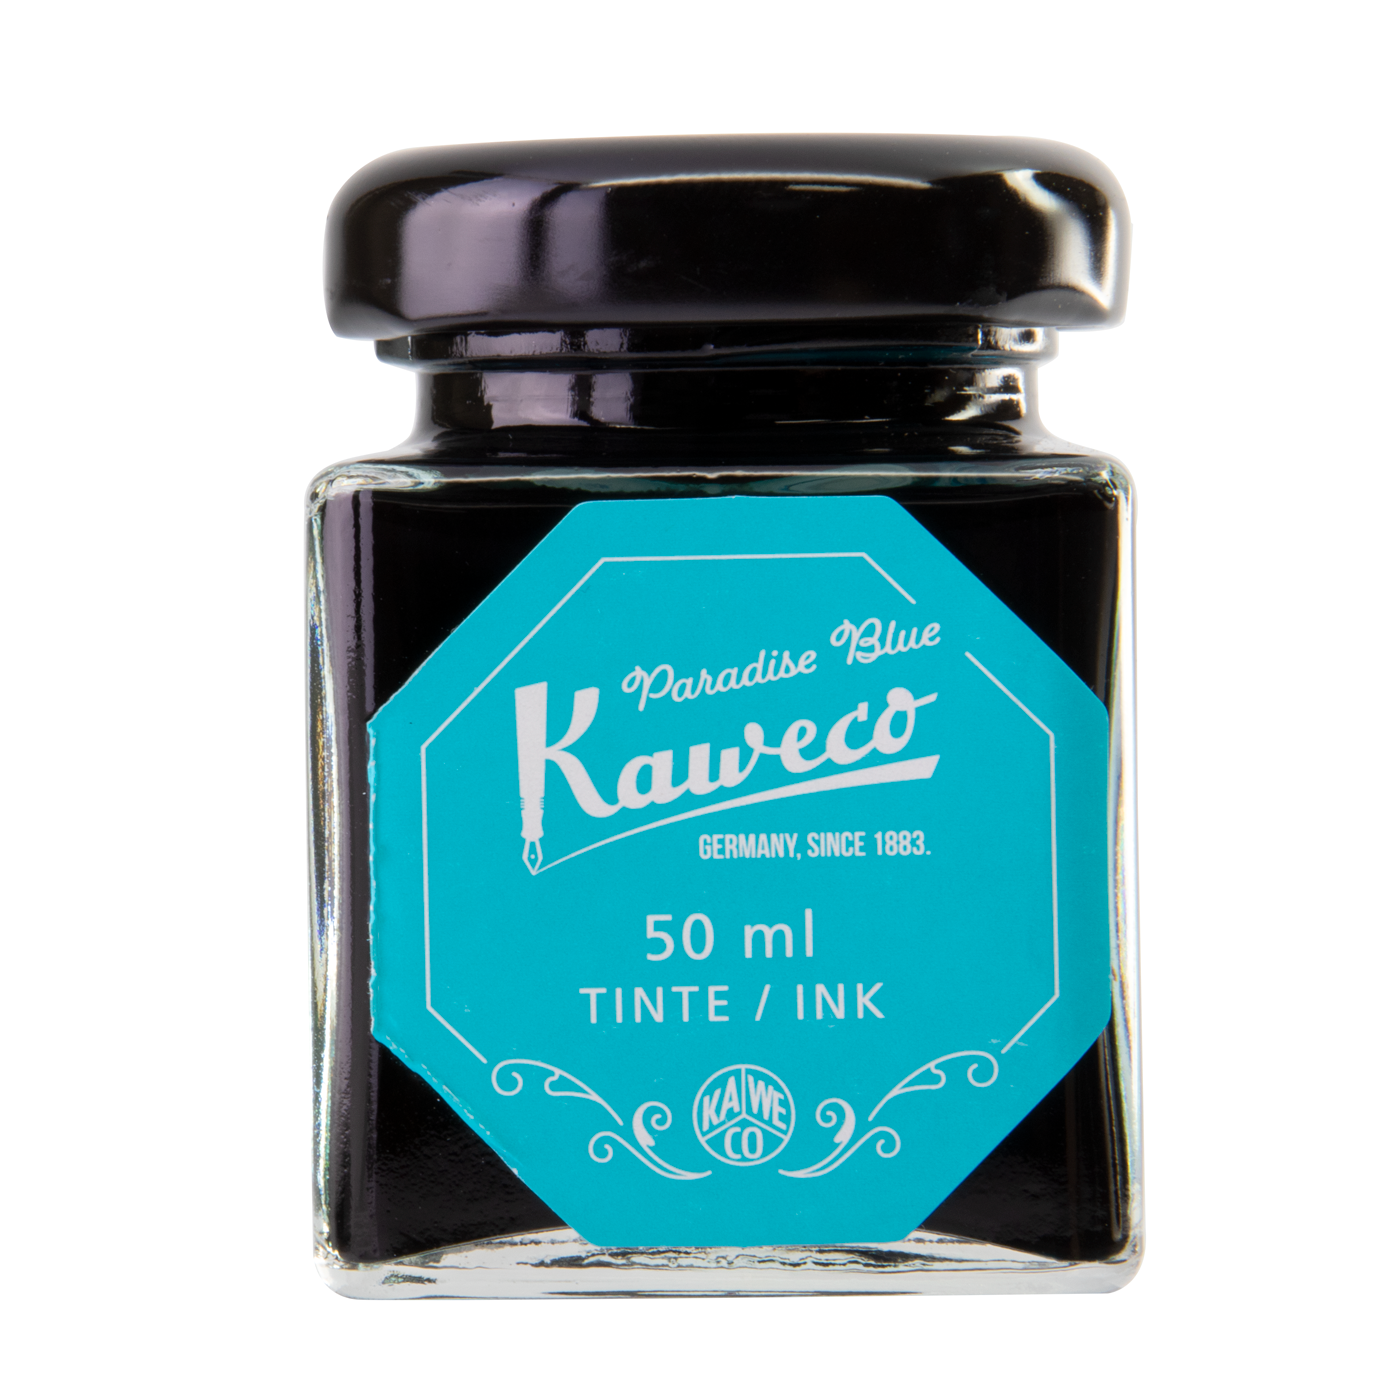 Kaweco Paradise Blue is a light summery turquoise fountain pen ink with medium shading. It dries in 40 seconds in a medium nib on Rhodia and has an average flow. Kaweco ink is made in Germany.